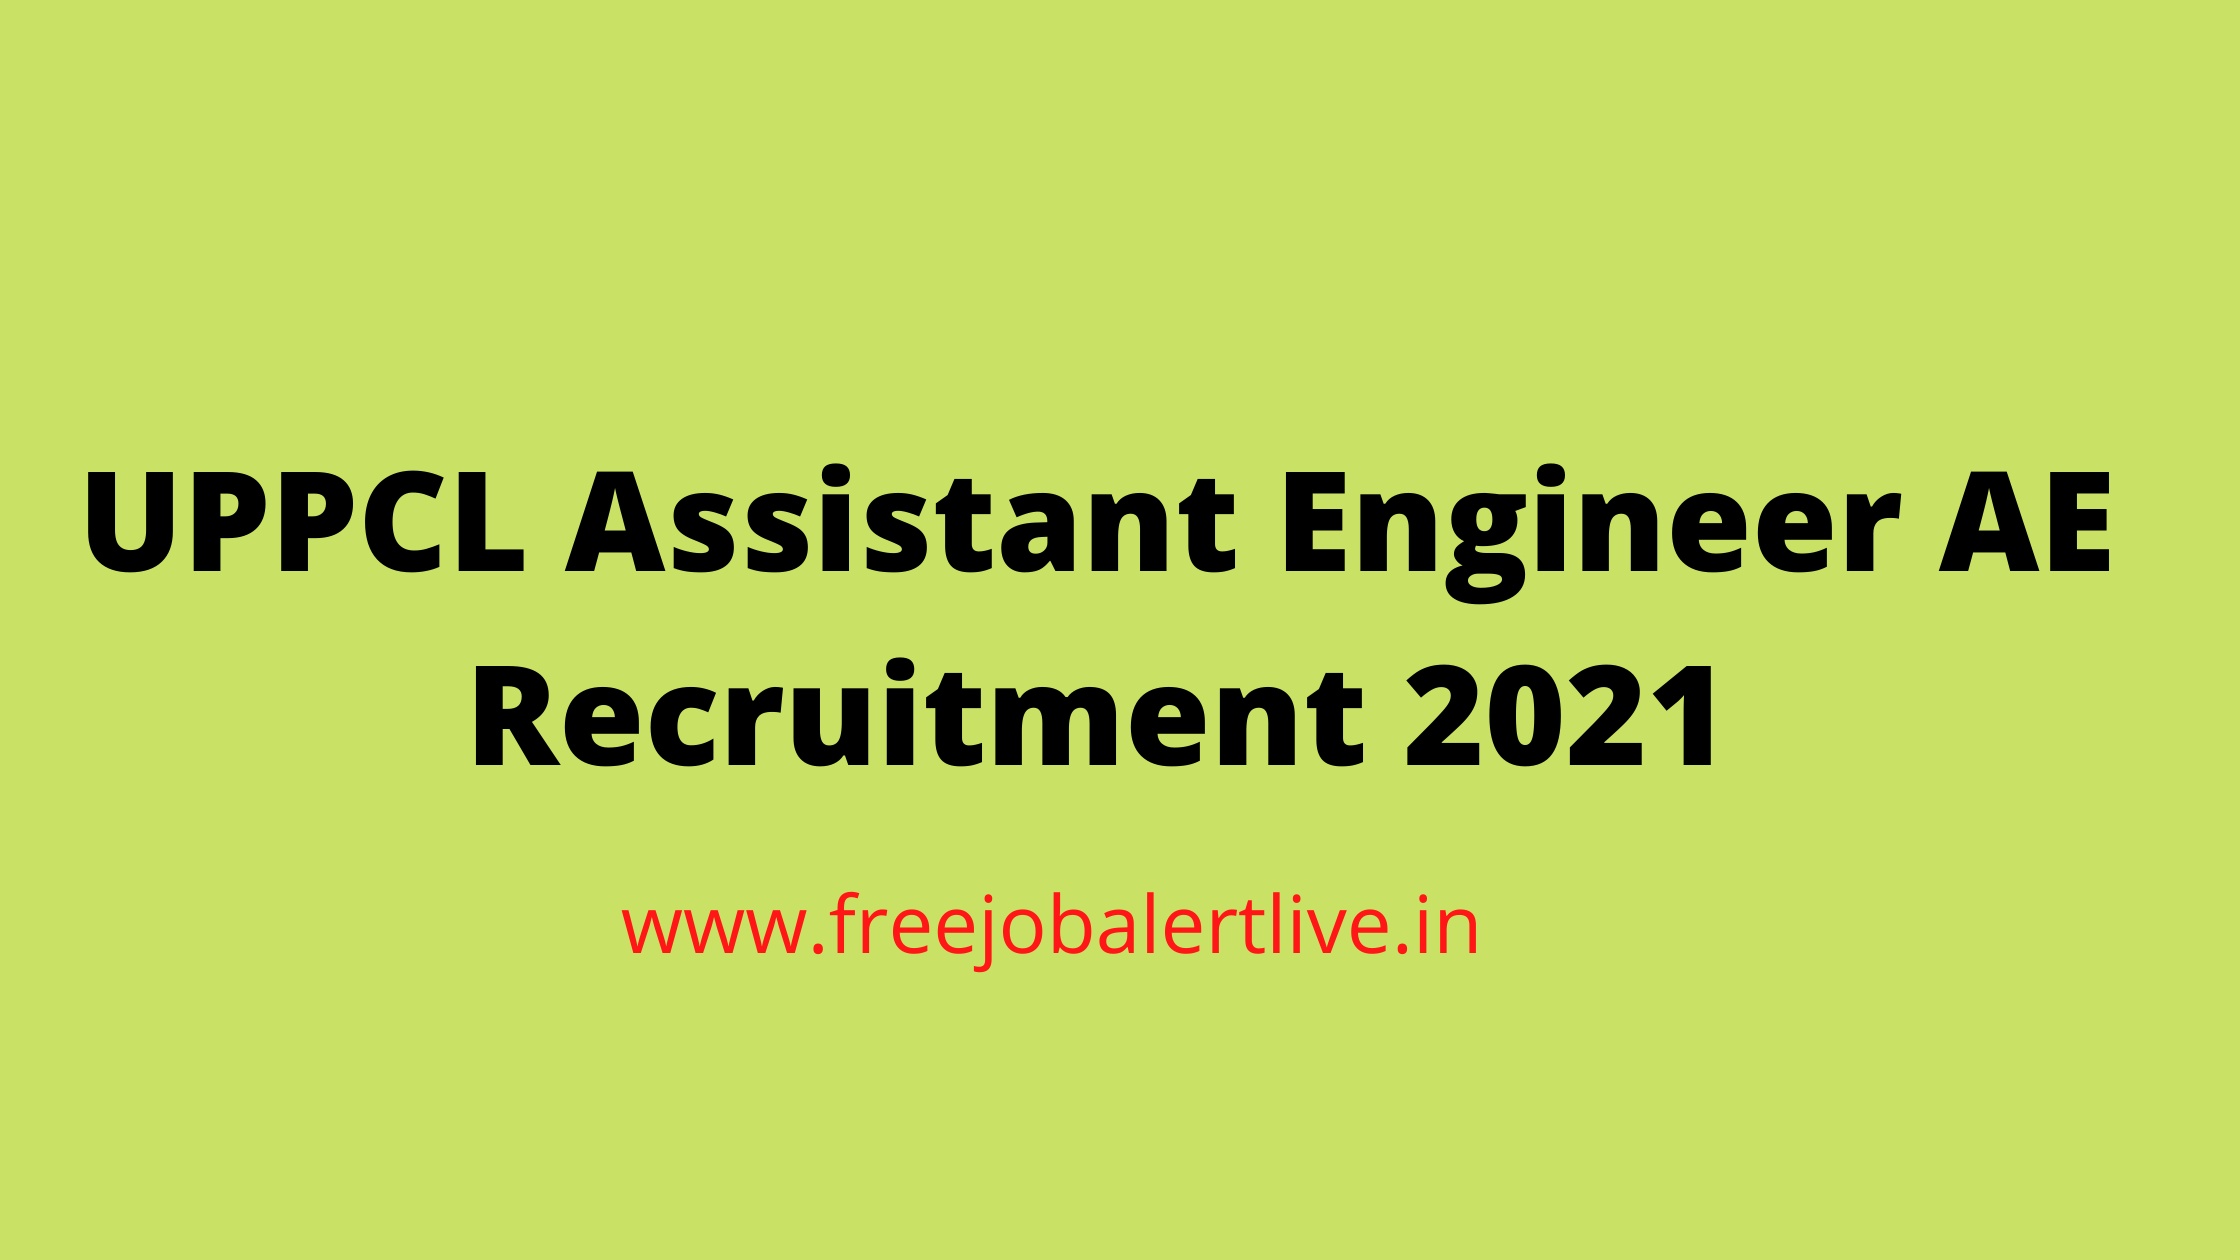 UPPCL Assistant Engineer AE Recruitment 2021